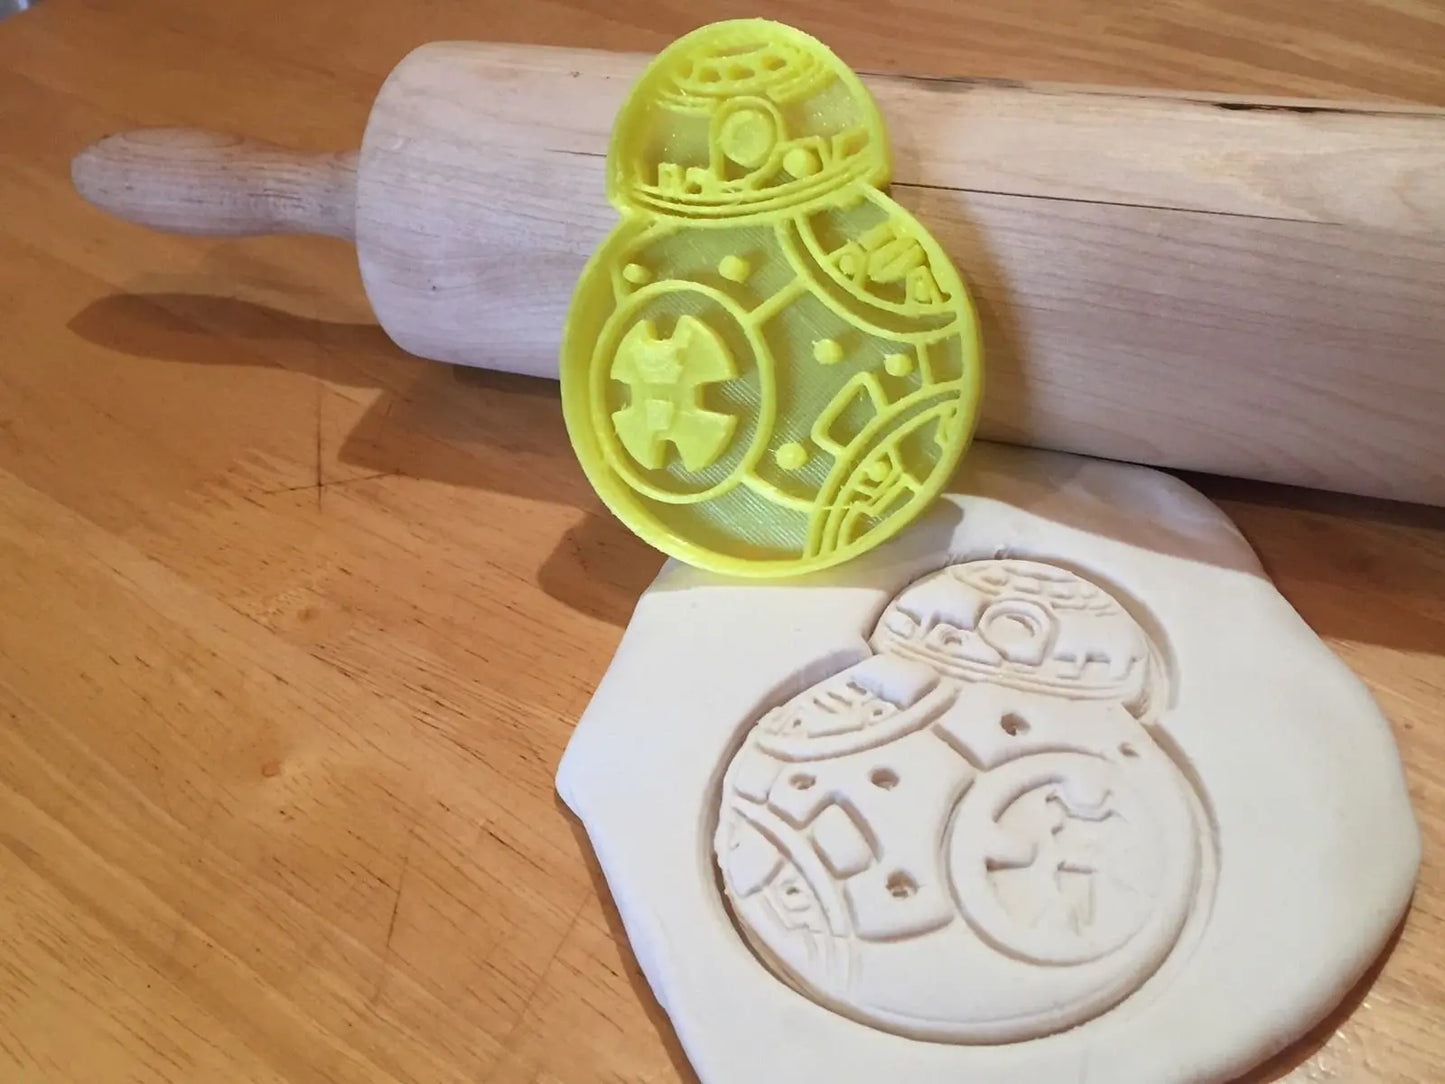 BB-8 Star wars-inspired Cookie cutter MEG cookie cutters